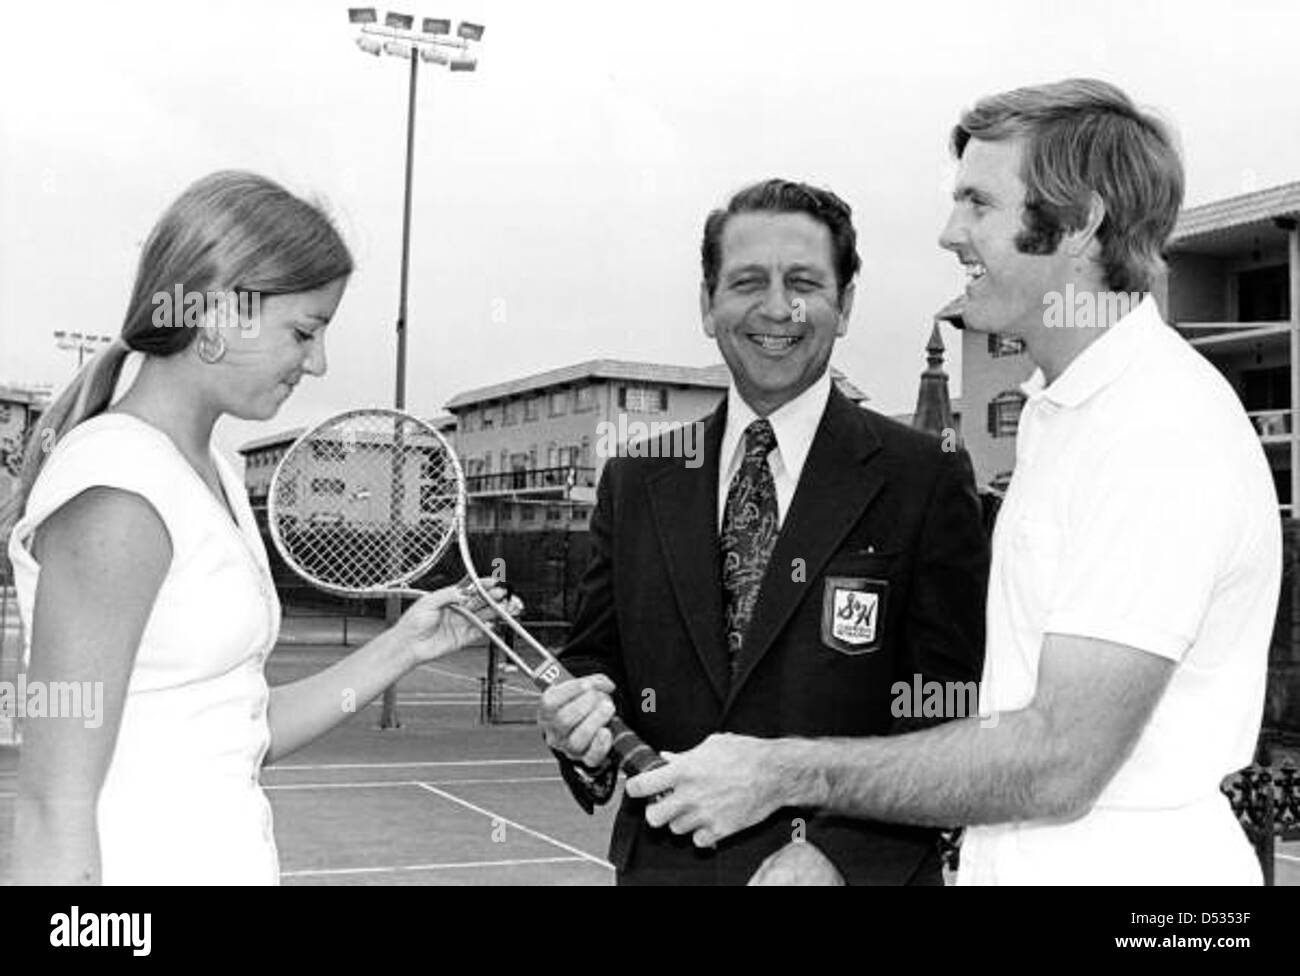 Professional athletes Chris Evert, tennis player at left, and Miami Dolphins quarterback Bob Griese, right, with a representative from S&H Green Stamps: Fort Lauderdale, Florida Stock Photo